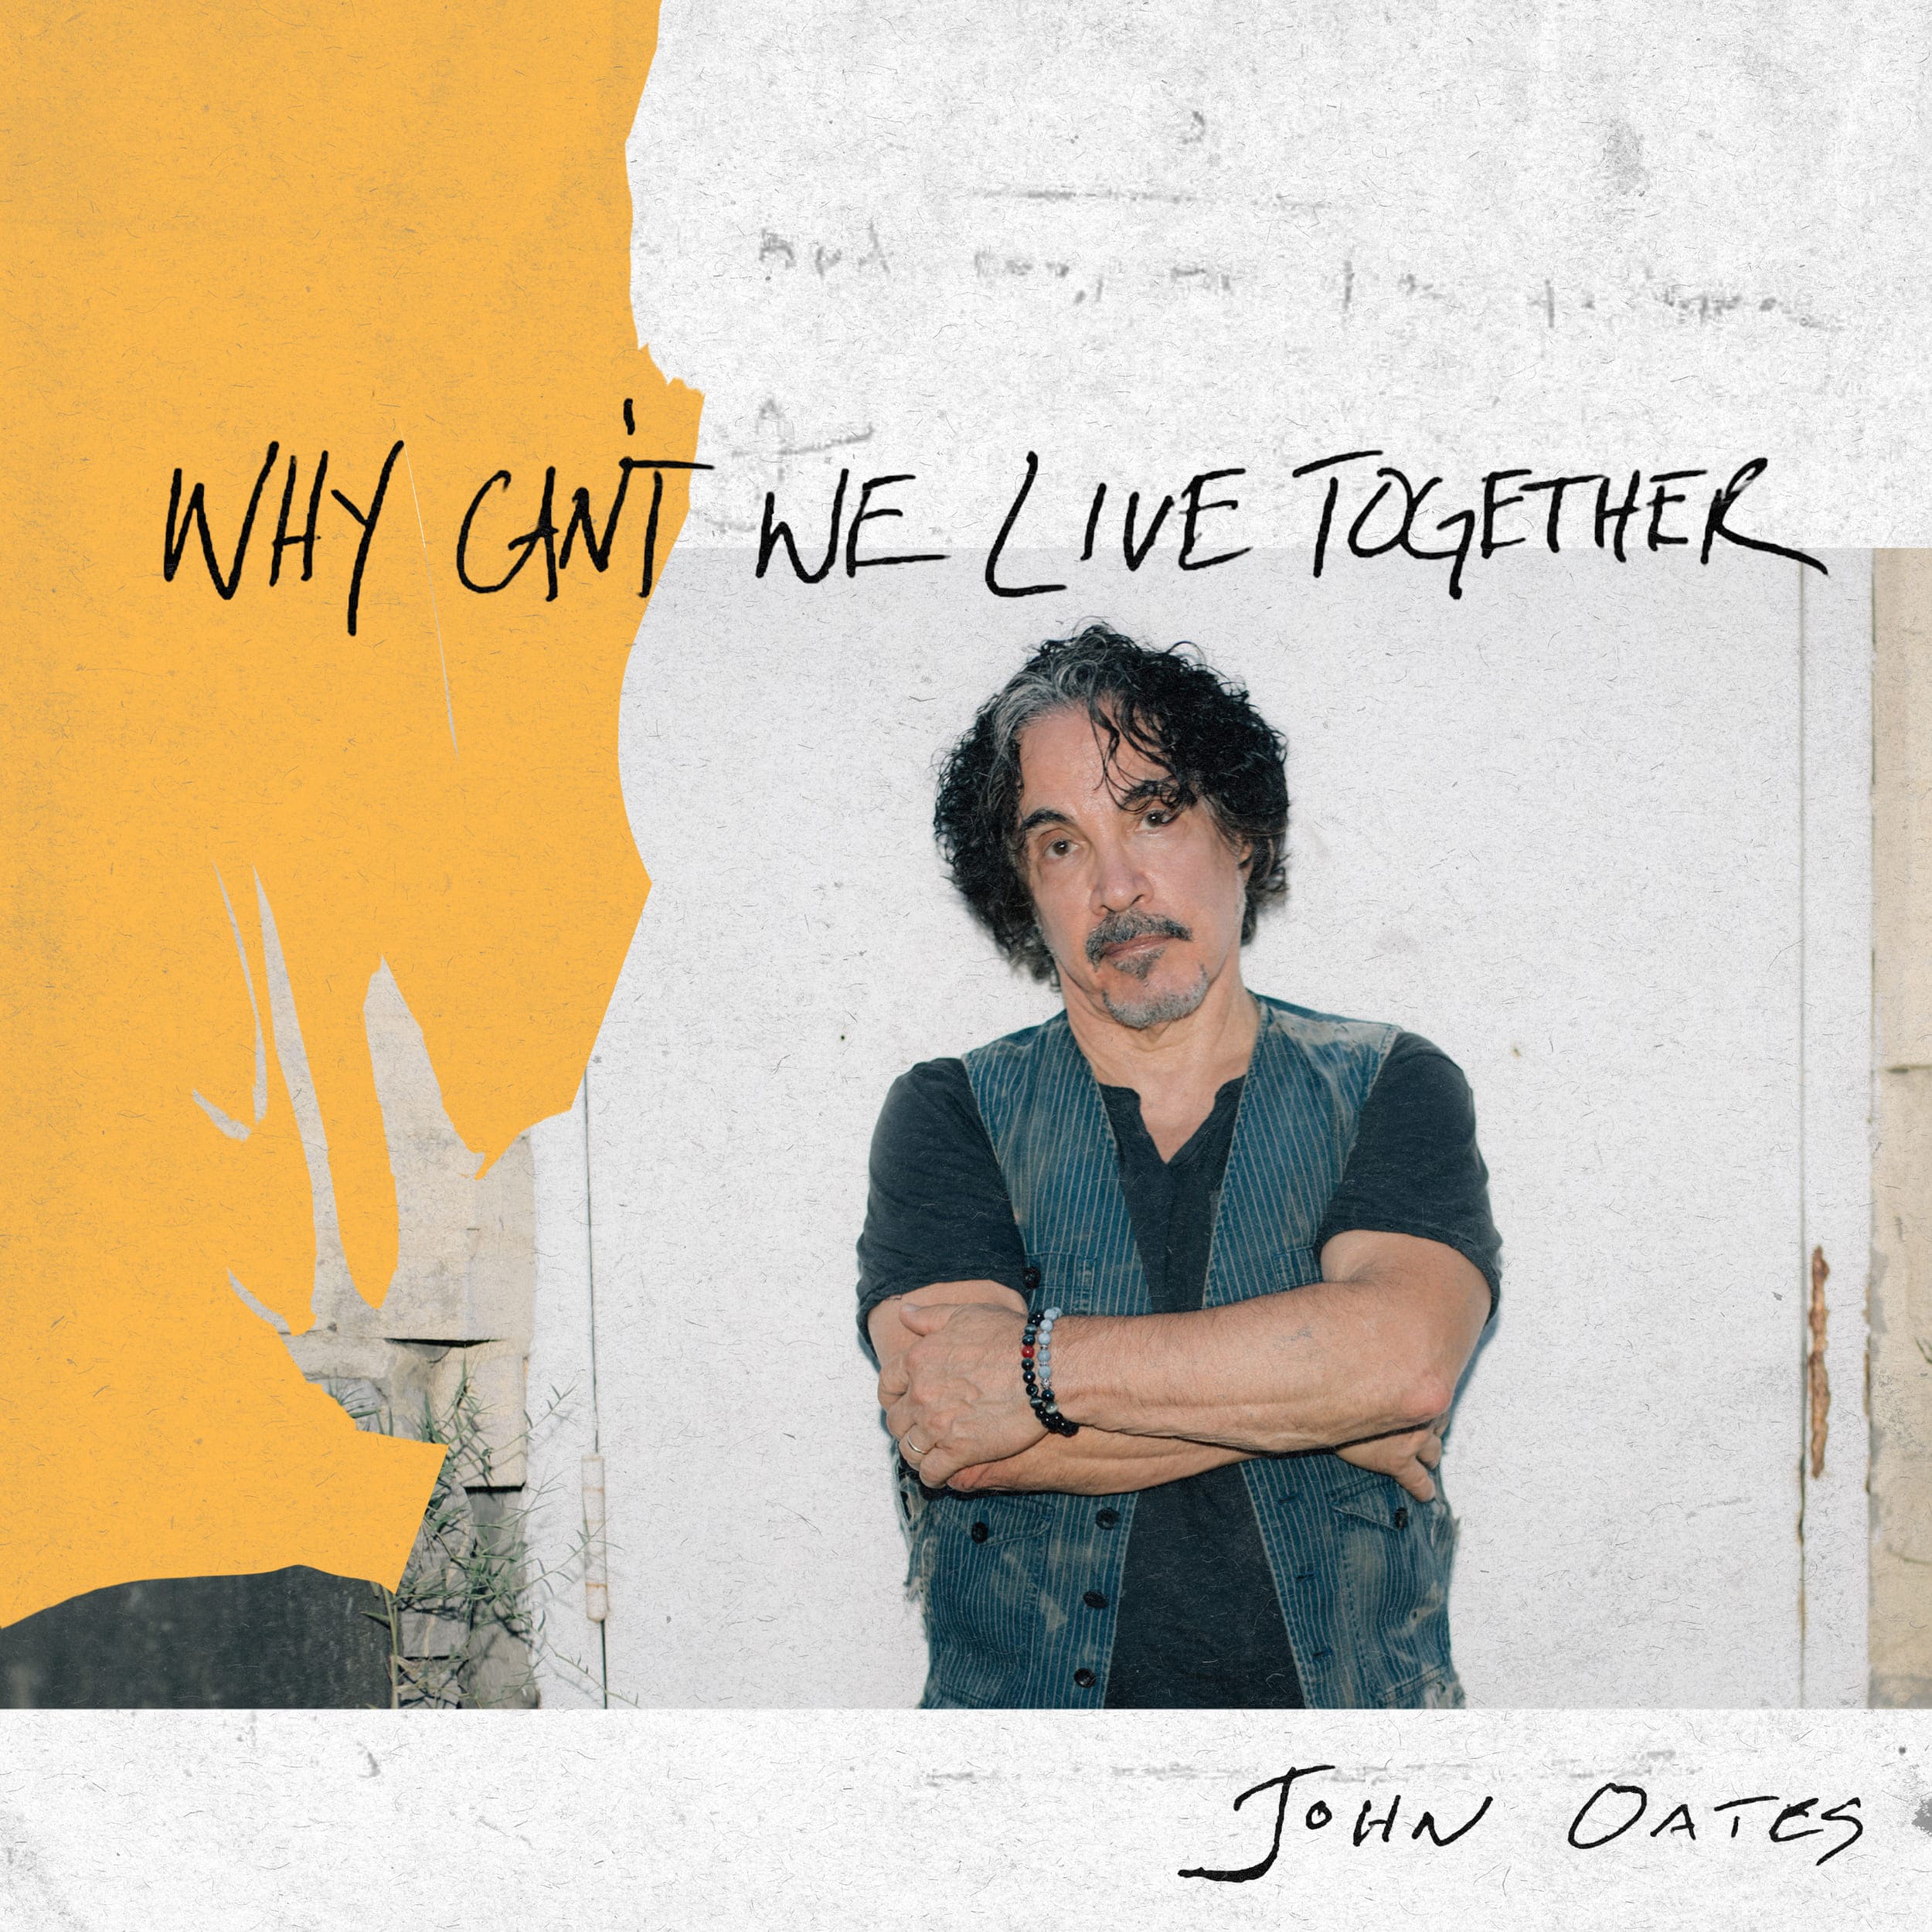 John Oates - Why Can't We Live Together (Single)